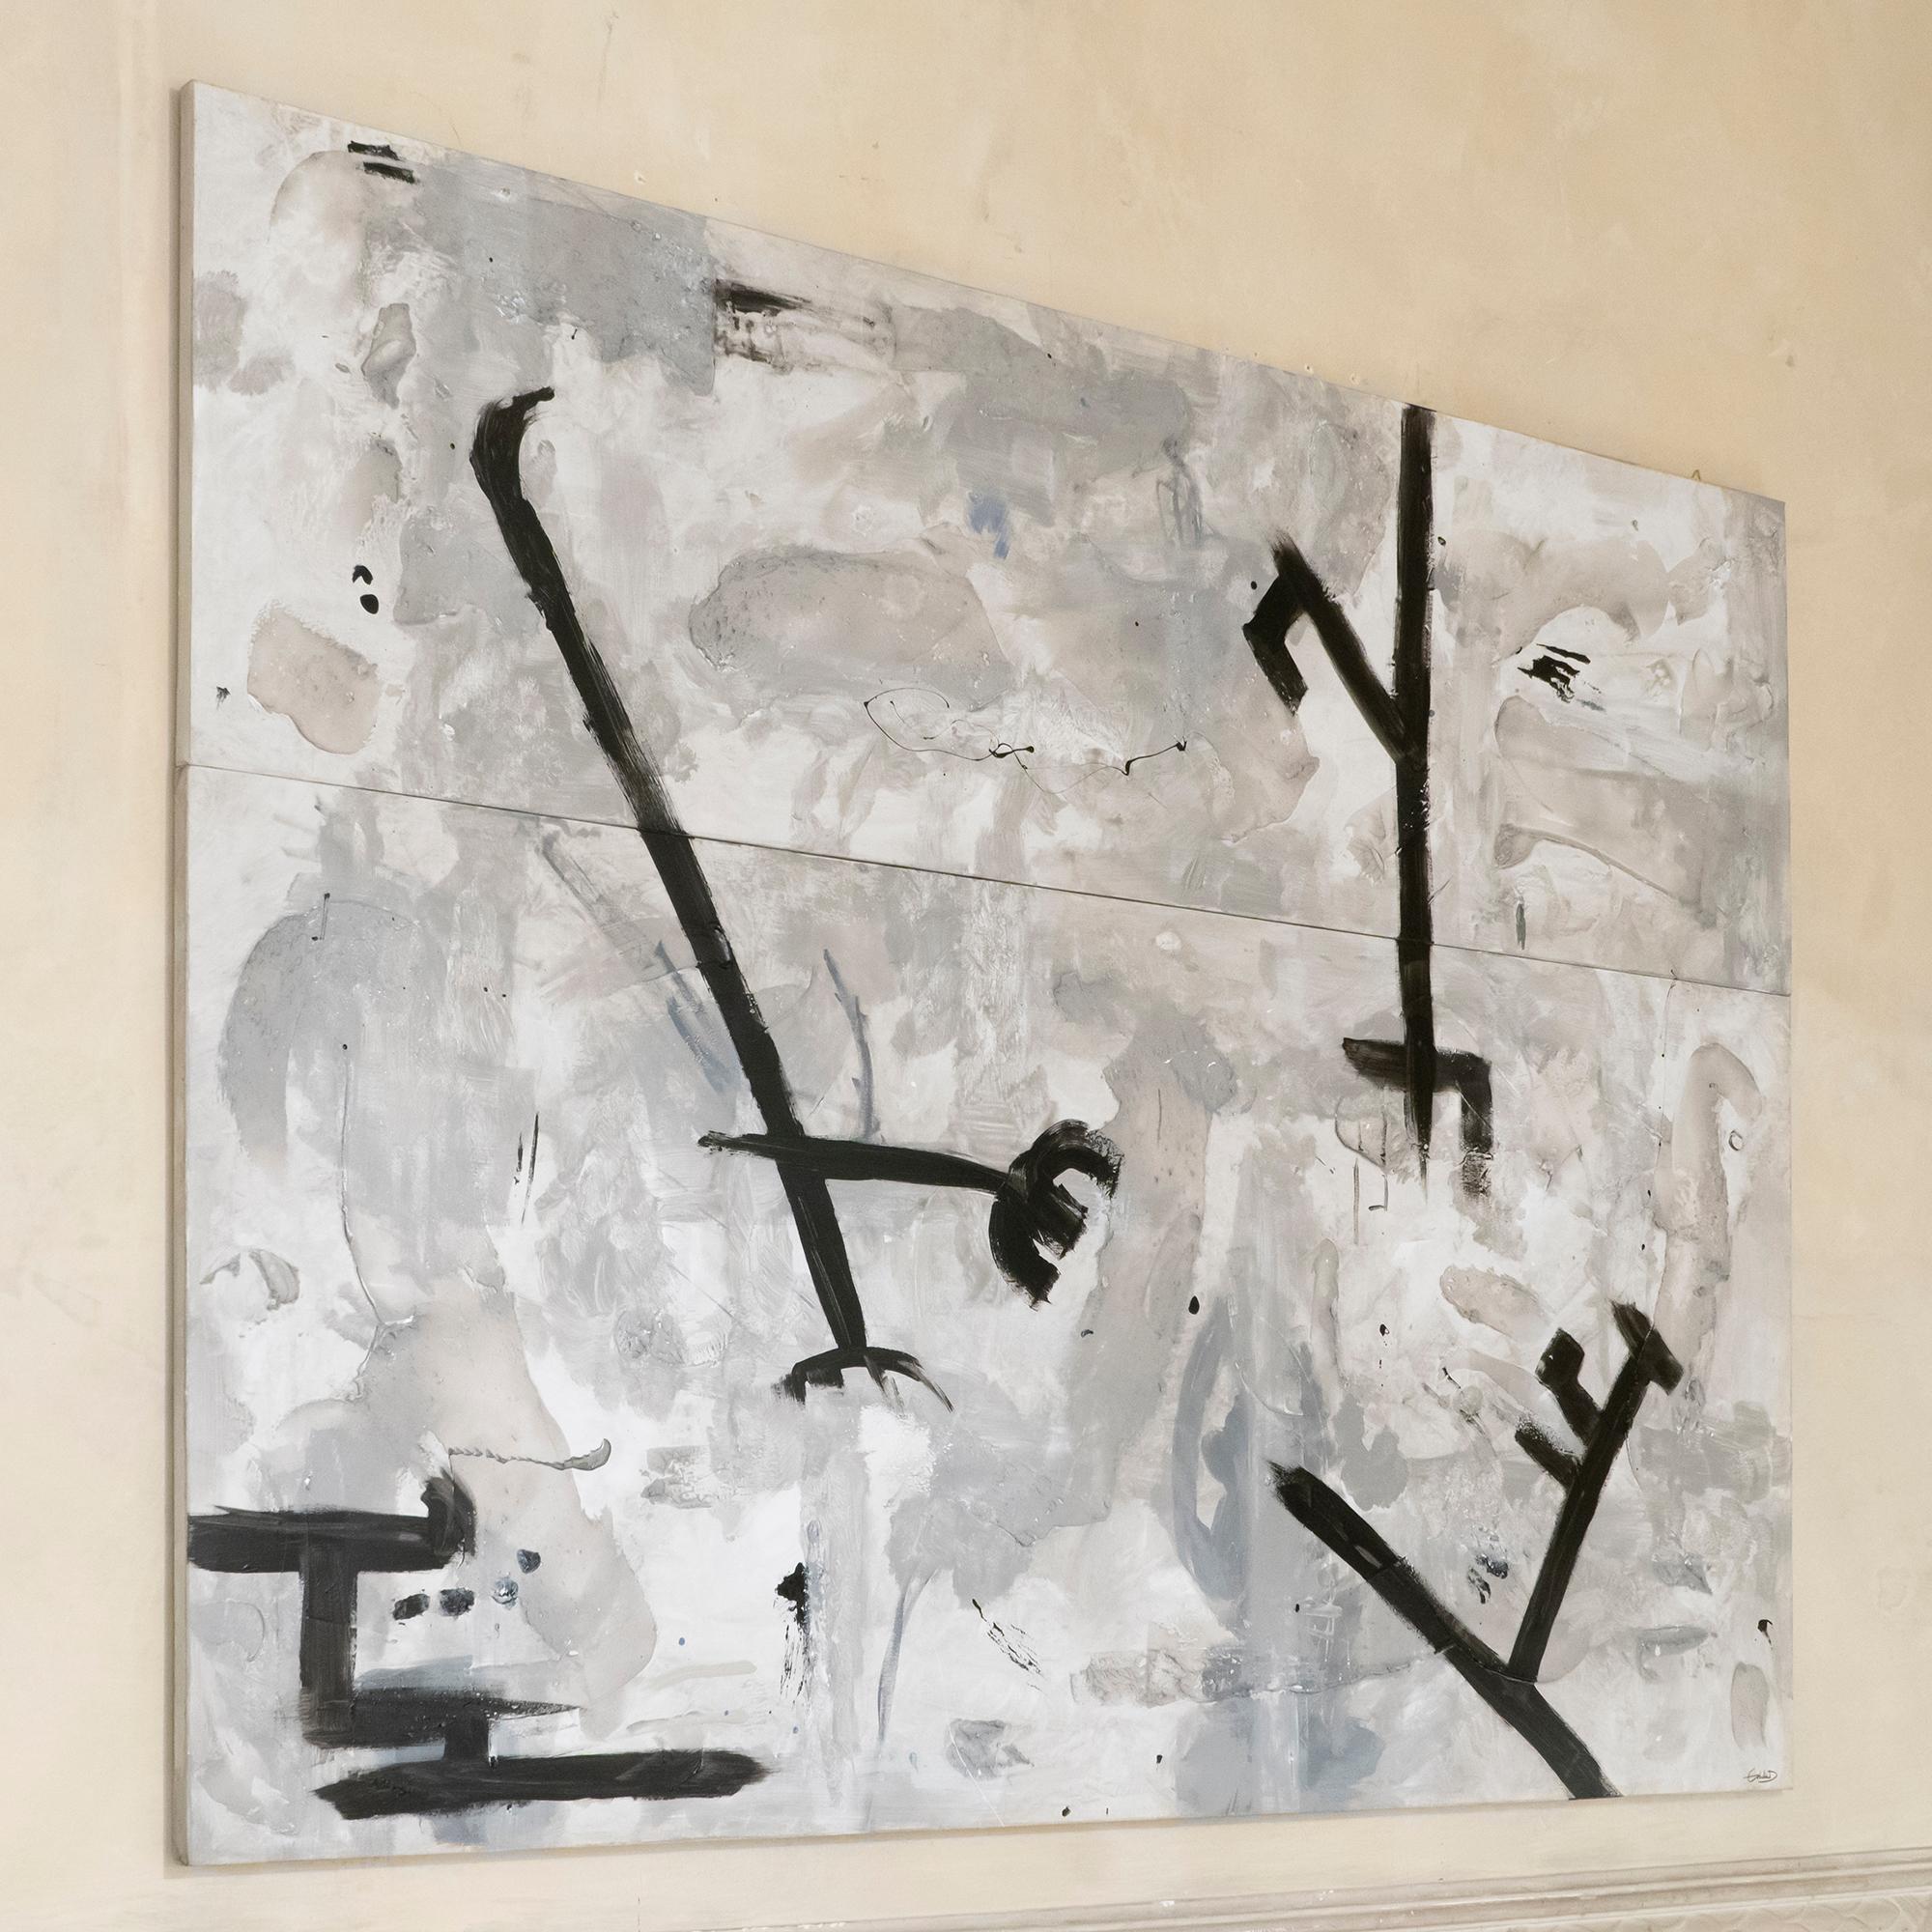 Black and white mixed-media abstract painting on canvas, can be display as a single wall art piece or separately as a diptych, by Guendalina Dorata, Italy, 2018.